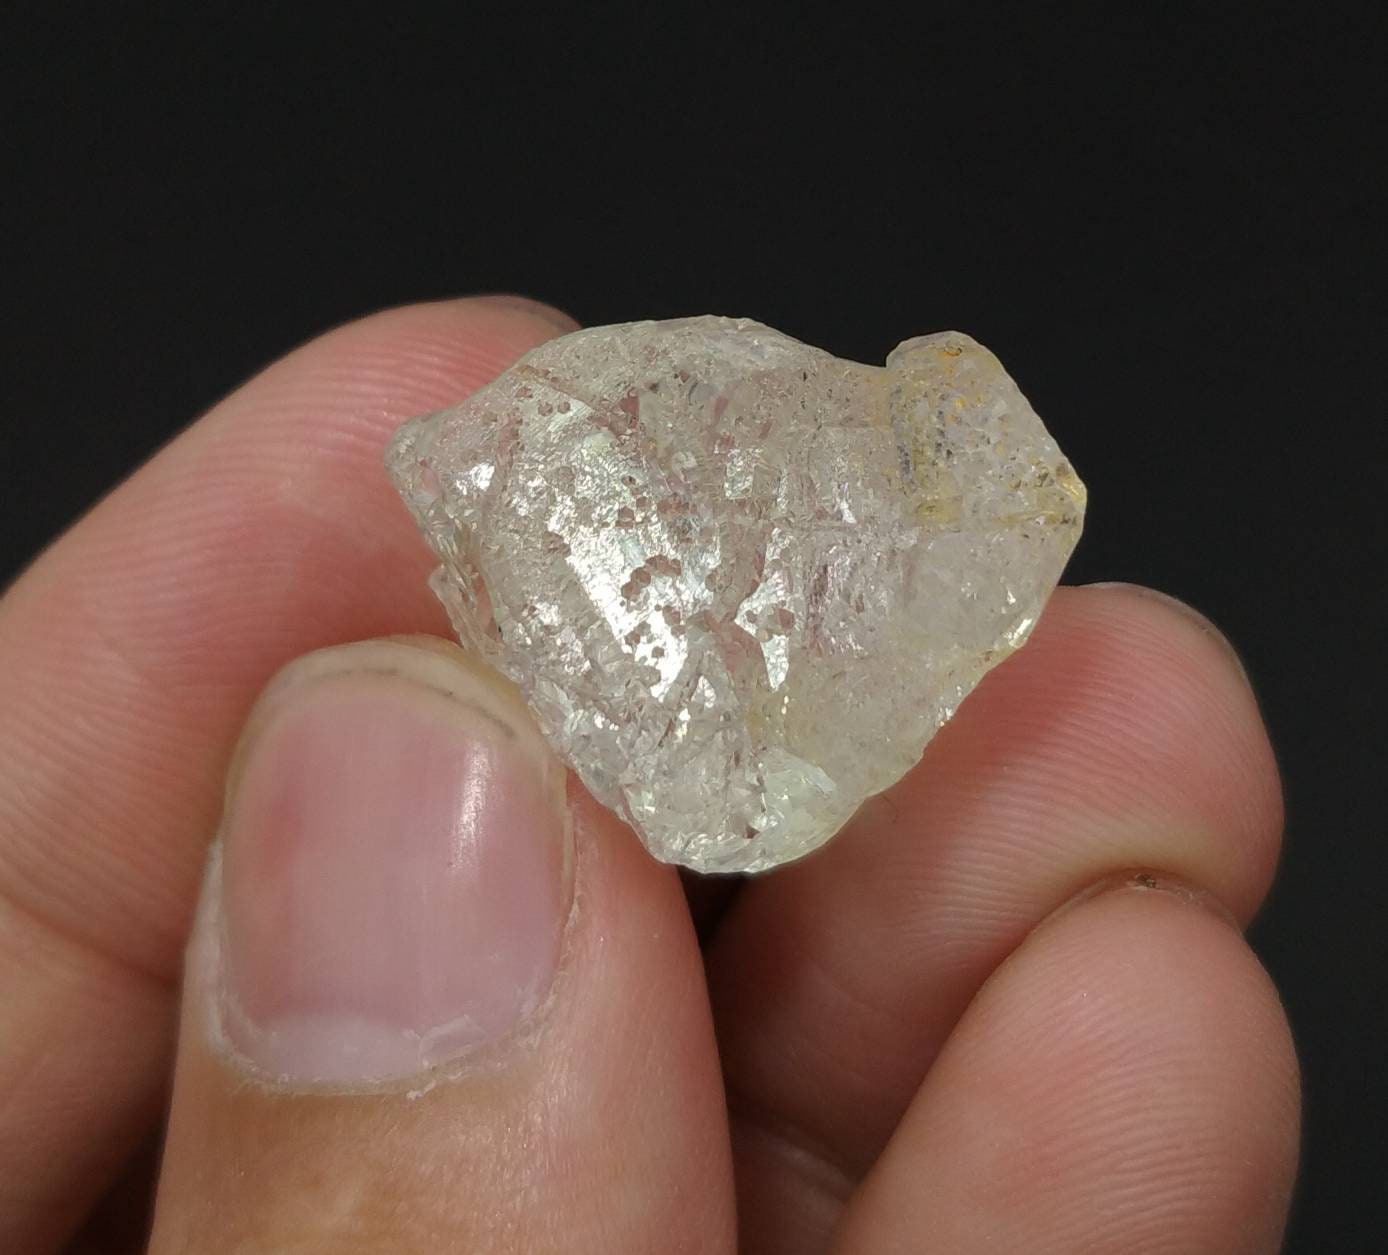 ARSAA GEMS AND MINERALSEtched gemmy clear transparent white Beryl crystal from Skardu GilgitBaltistan Pakistan, weight 6.9 grams - Premium  from ARSAA GEMS AND MINERALS - Just $35.00! Shop now at ARSAA GEMS AND MINERALS